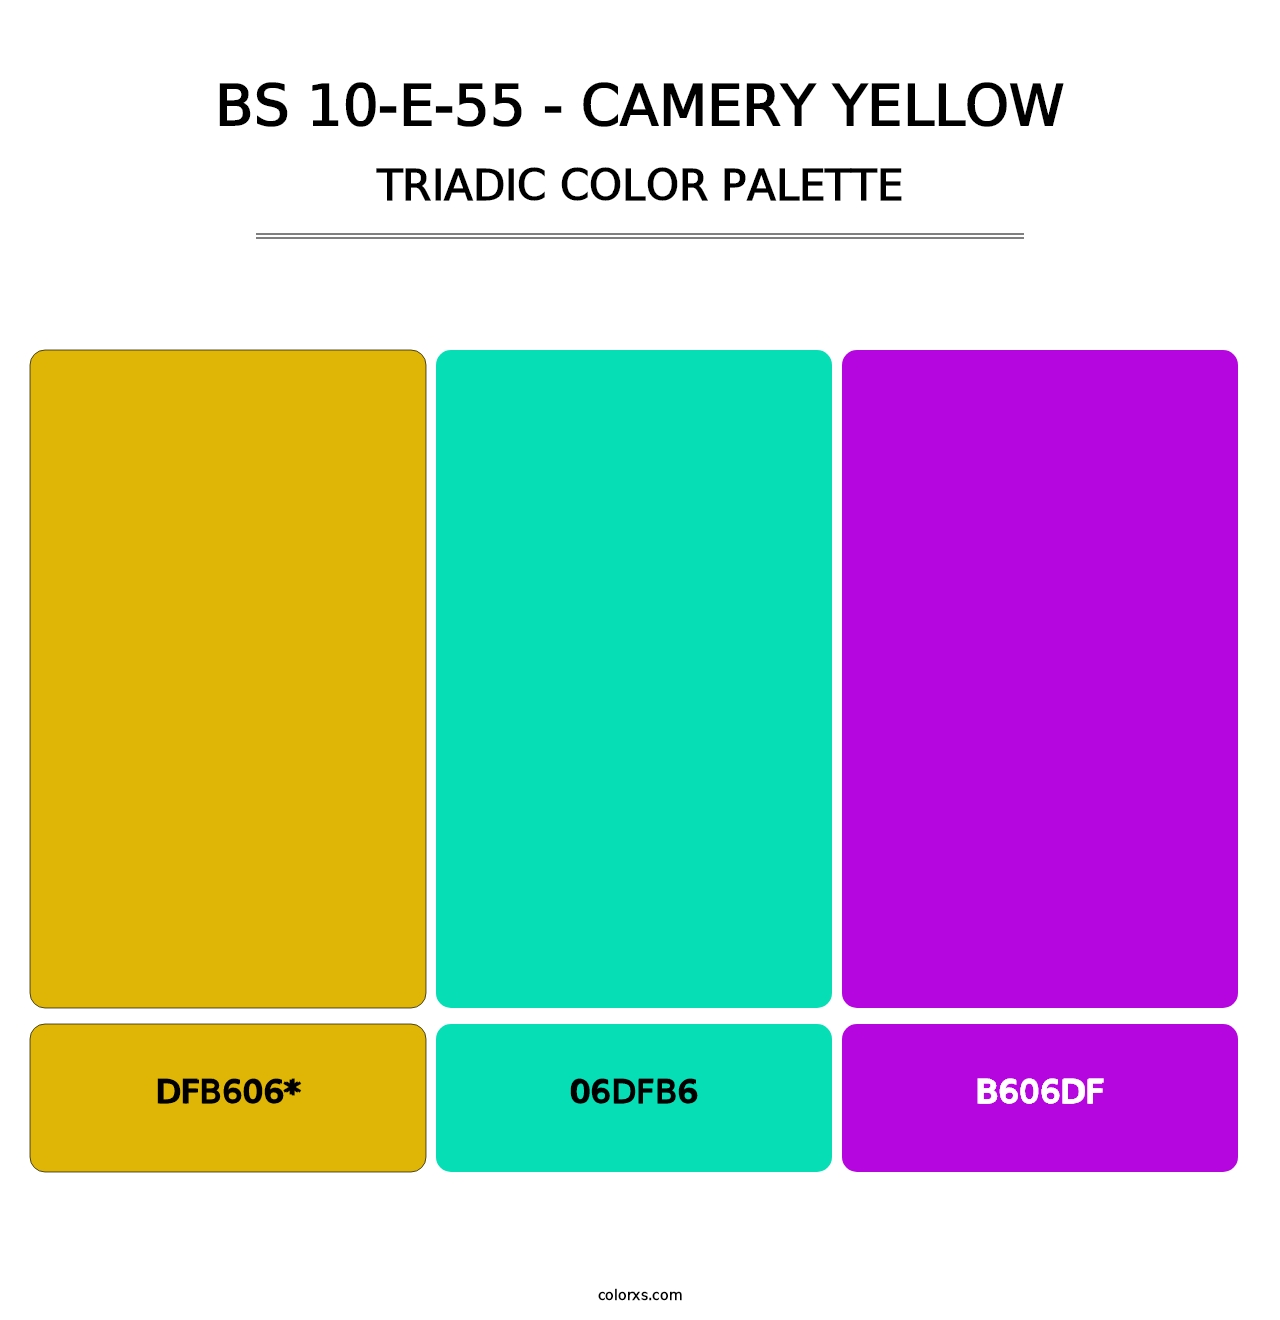 BS 10-E-55 - Camery Yellow - Triadic Color Palette